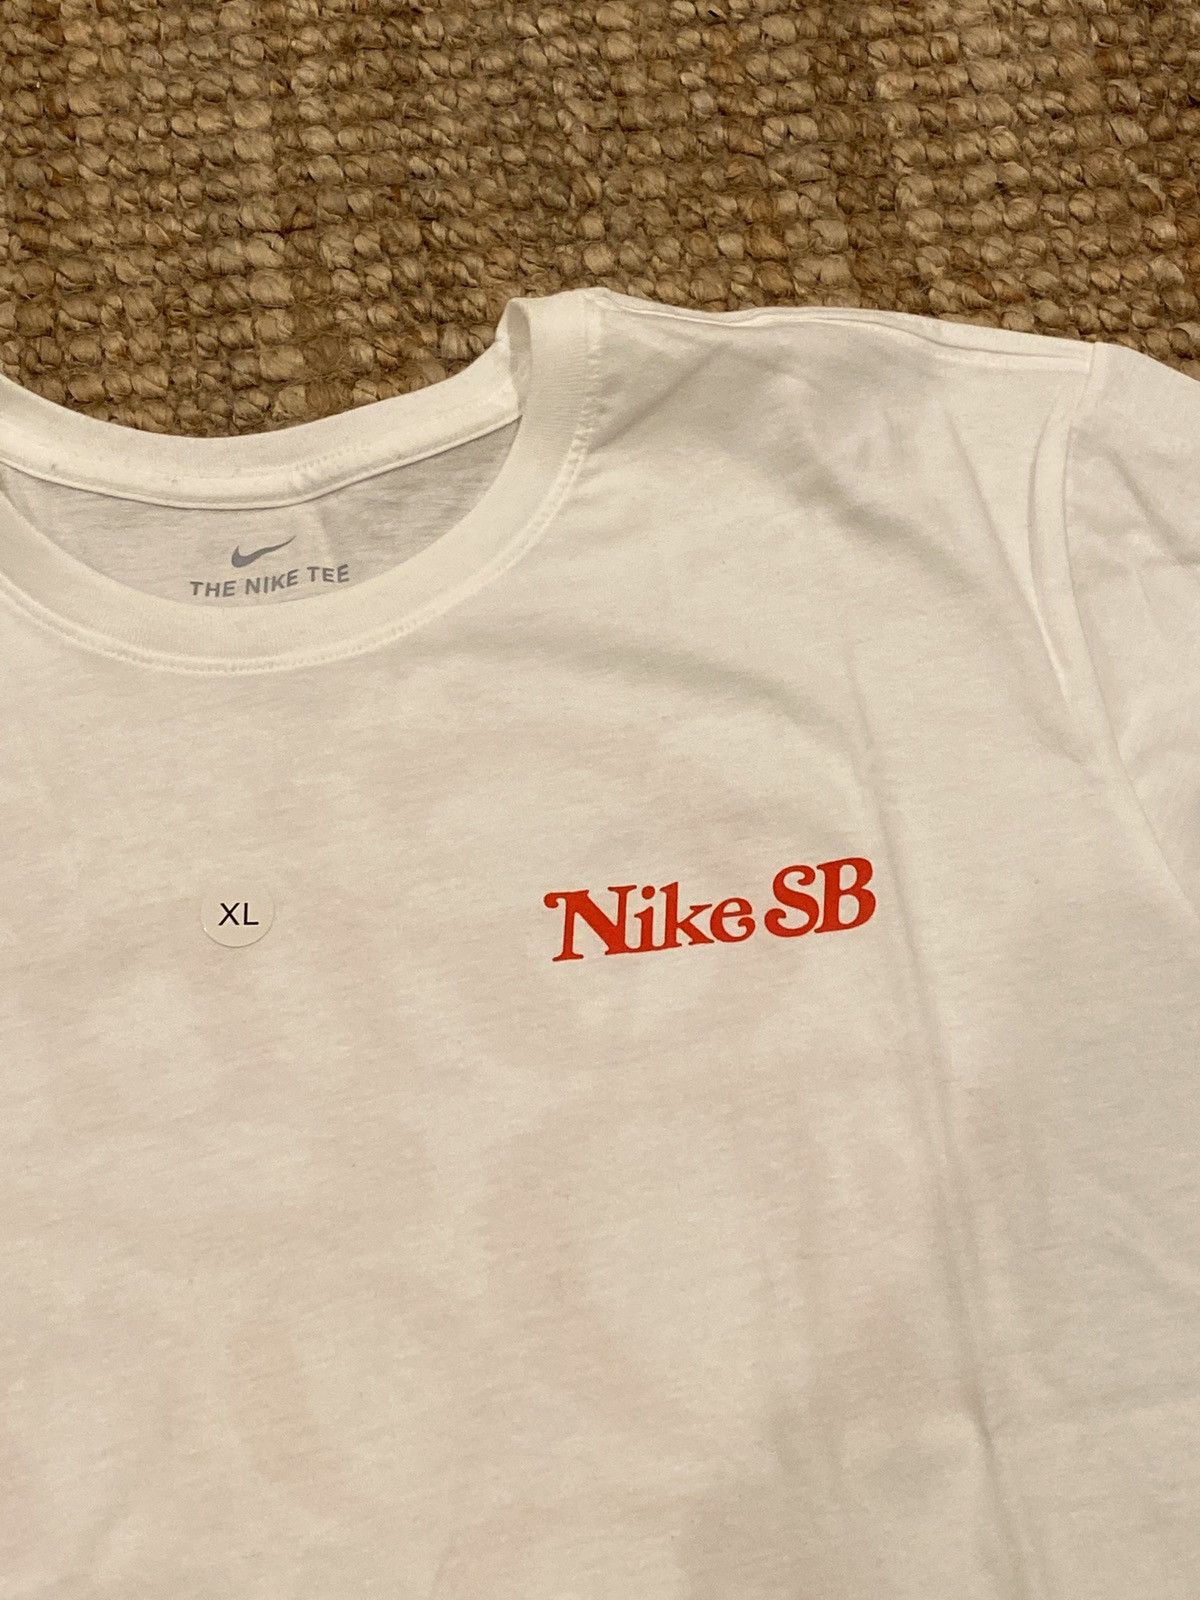 Girls Dont Cry Girls Don't Cry x Nike SB Tee | Grailed